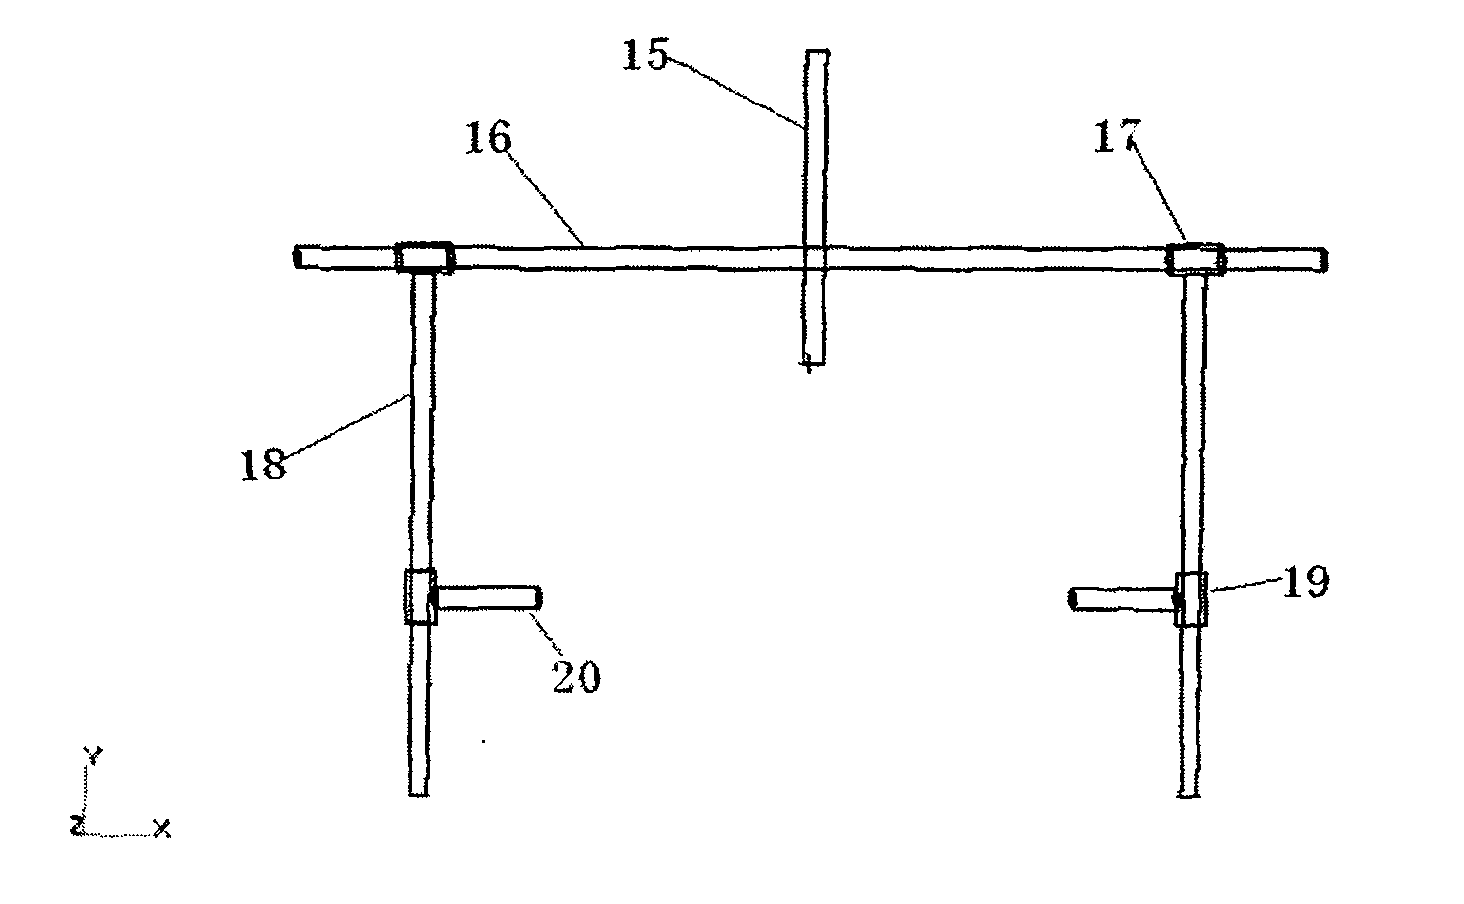 Testing apparatus for automatically measuring marine structure anchoring system stiffness